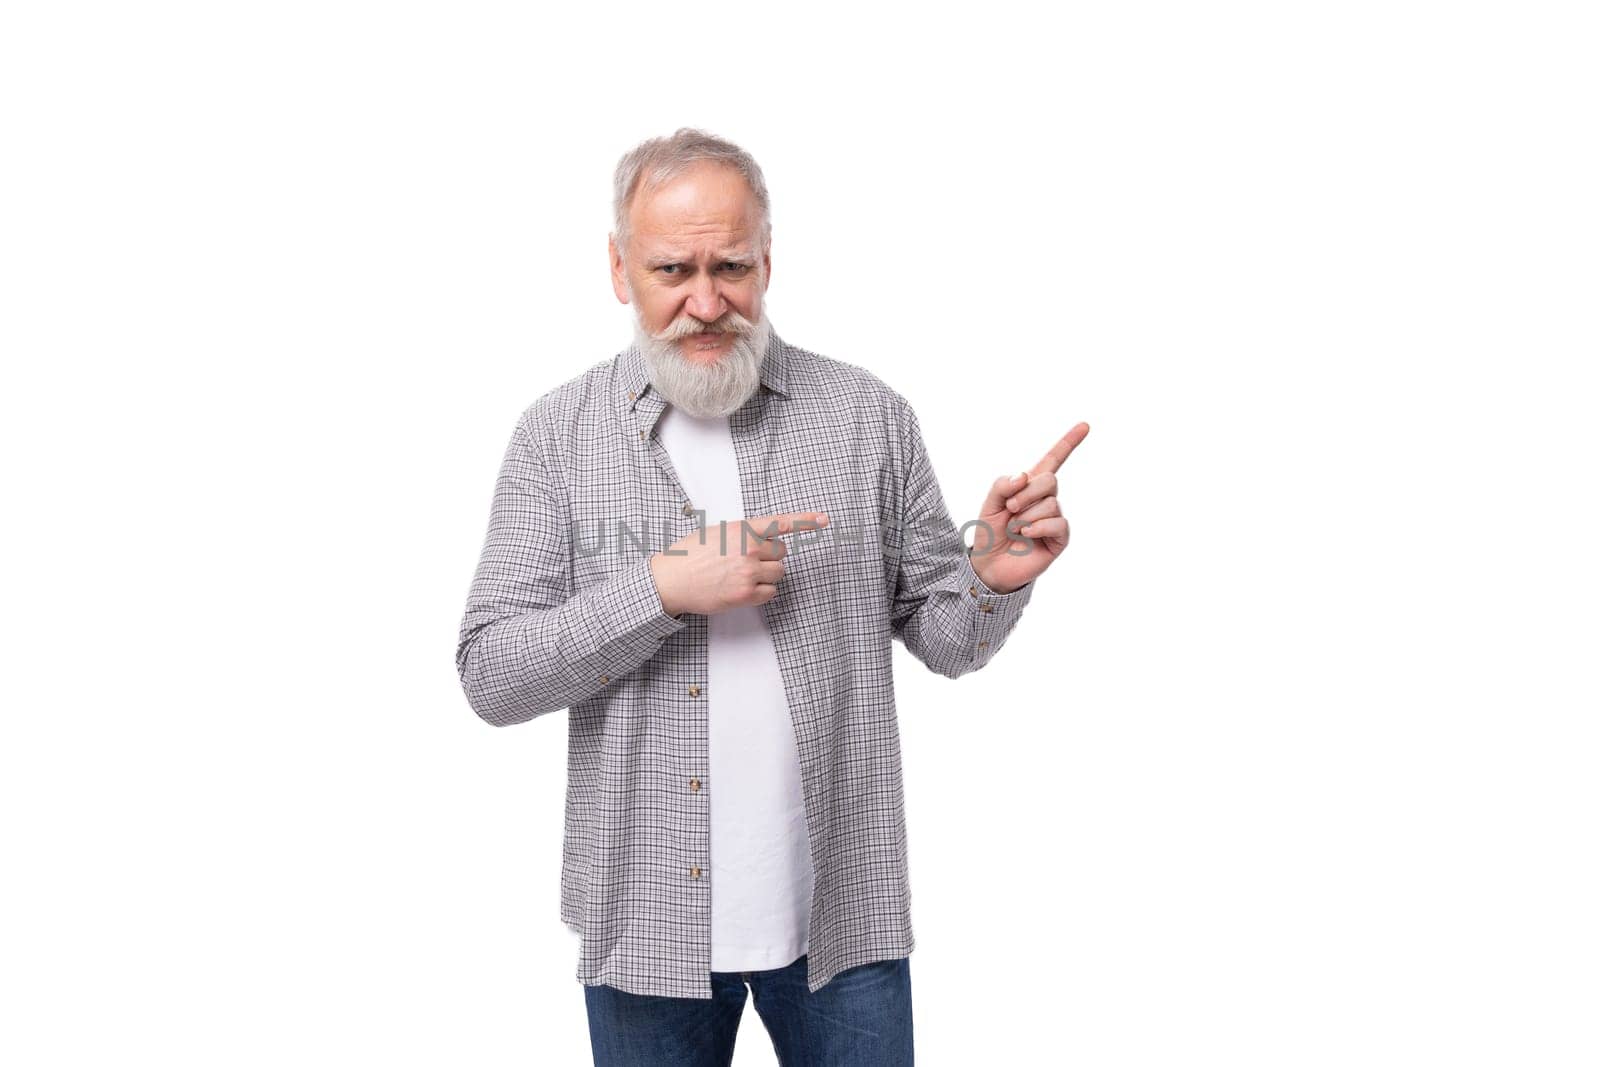 well-groomed senior man with a gray beard and mustache is dressed in a plaid shirt and jeans on a white background with copy space.